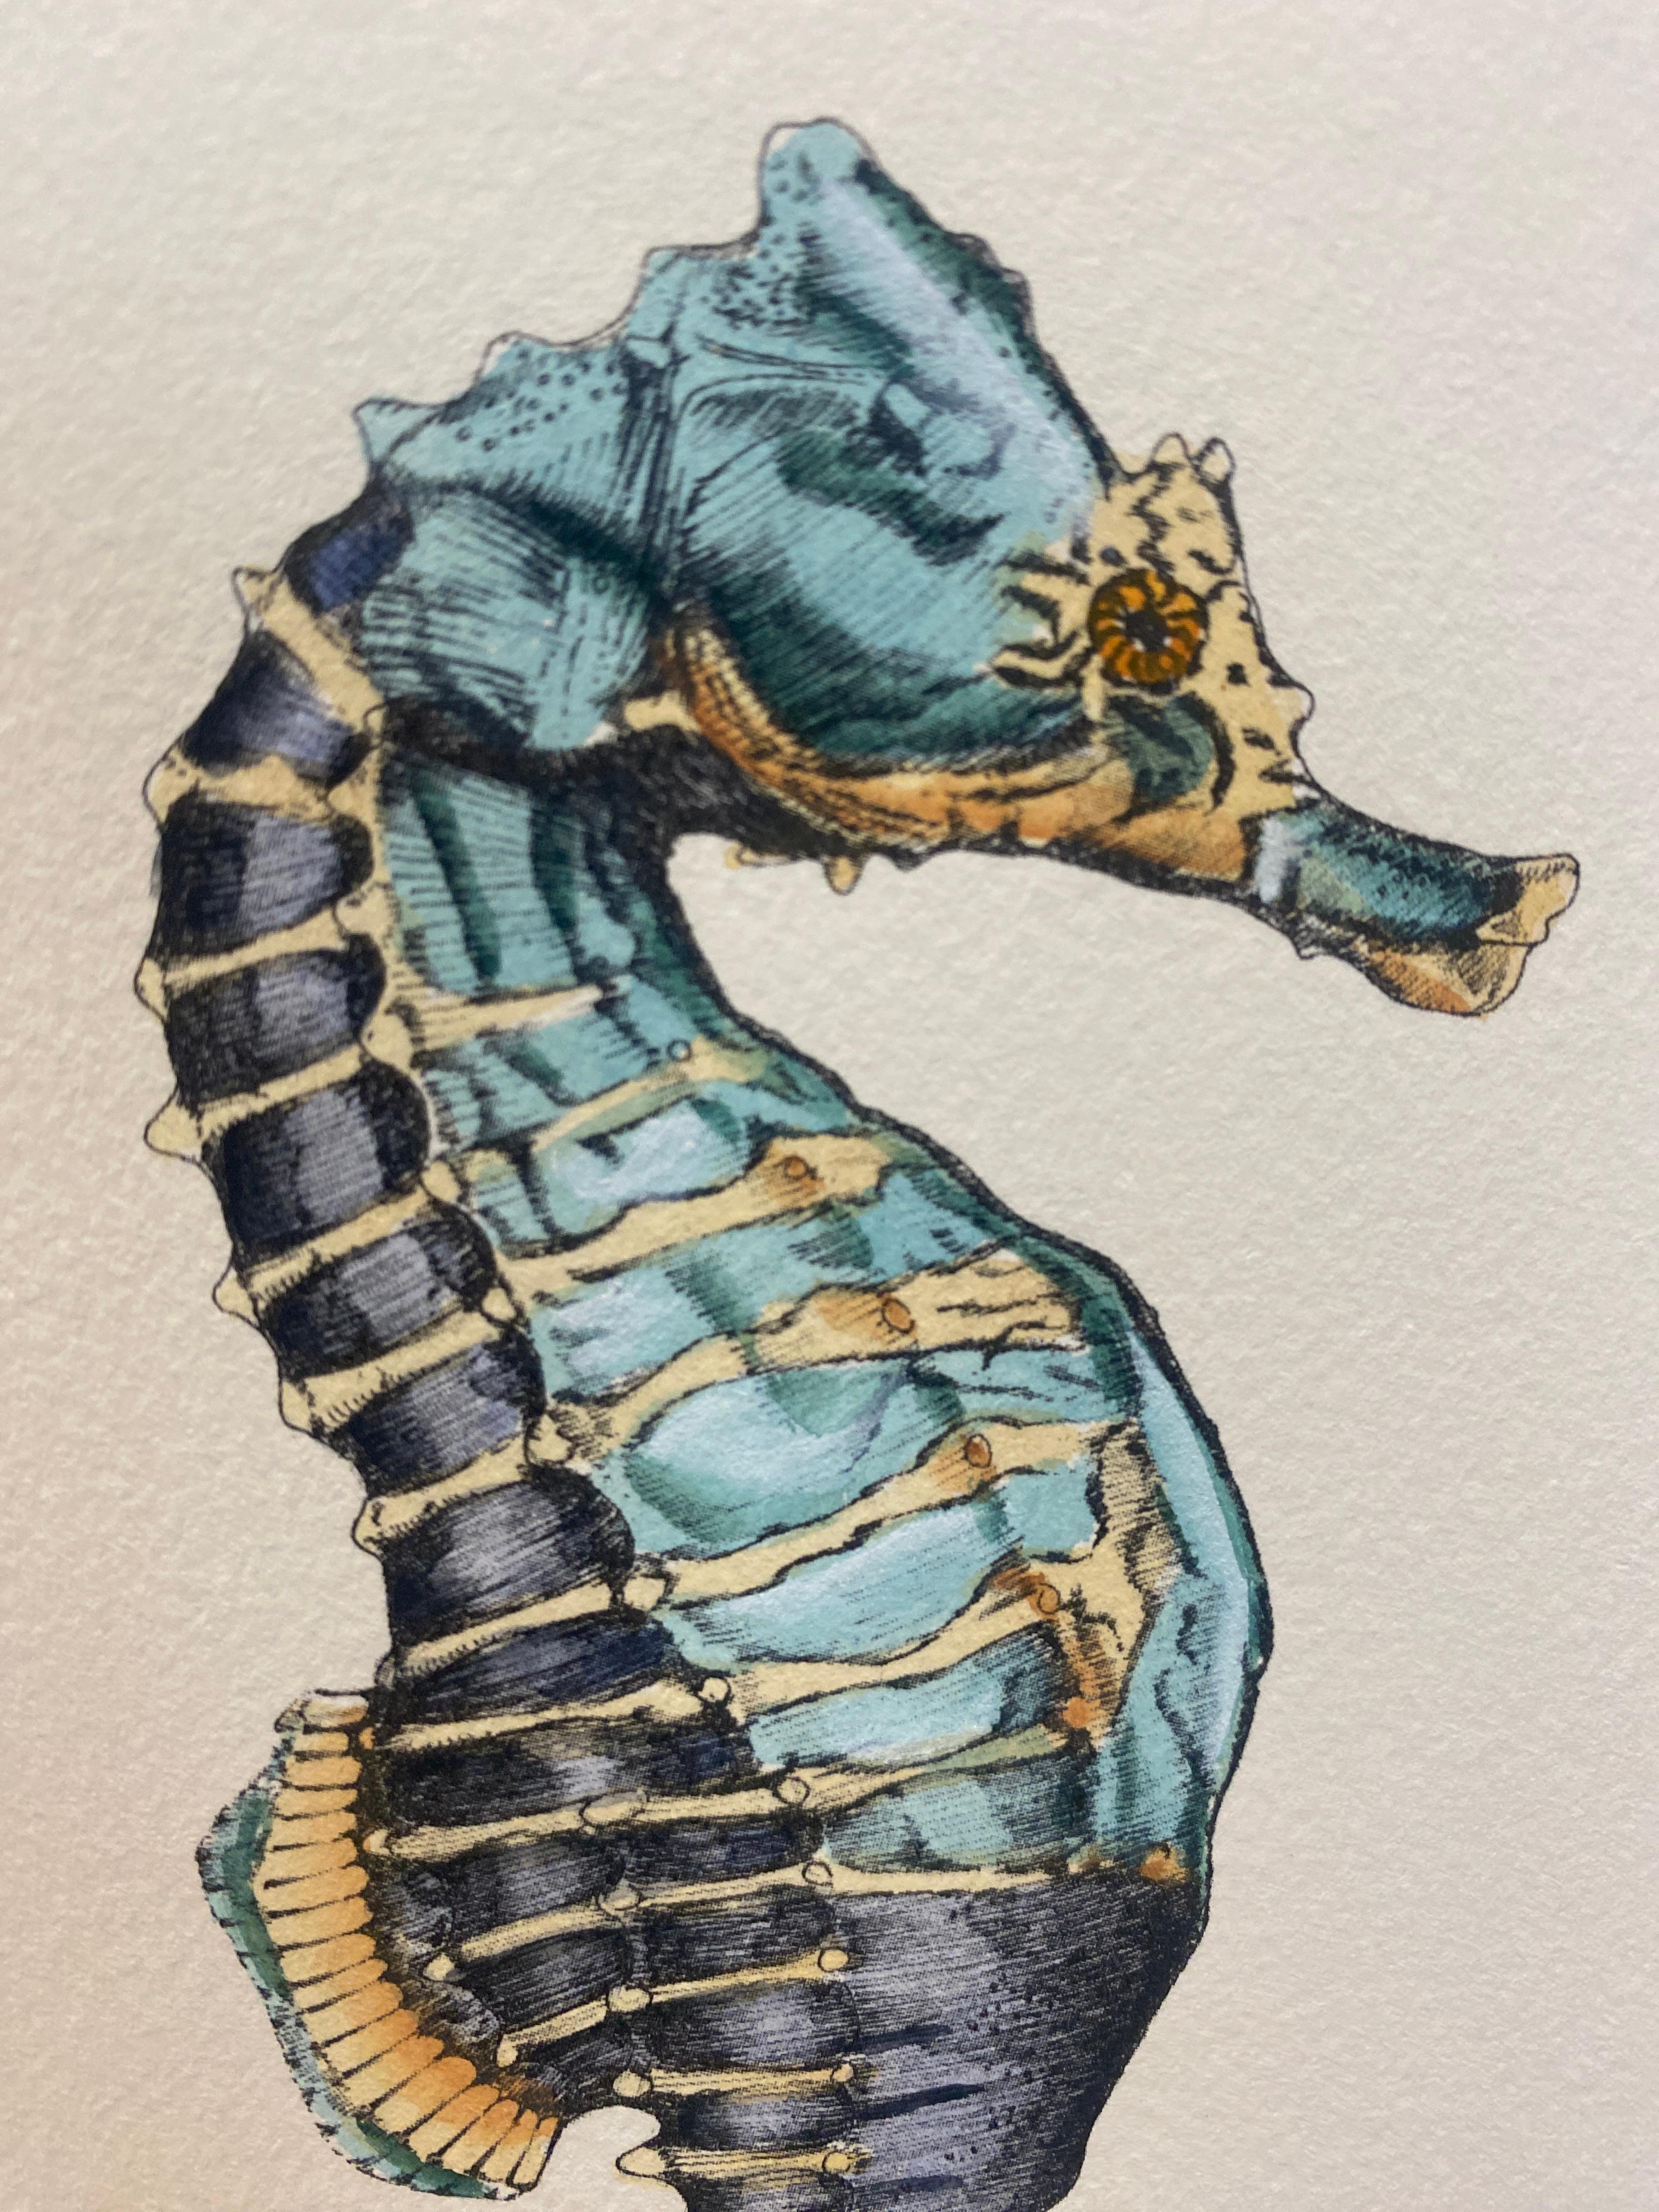 Elegant hand-watercolored print representing an Hippocampus Kuda in light blue nuance, Image reproduced from ancient and famous illustrations.
These prints are available in 2 different representations, to create a bright and joyful composition:
-